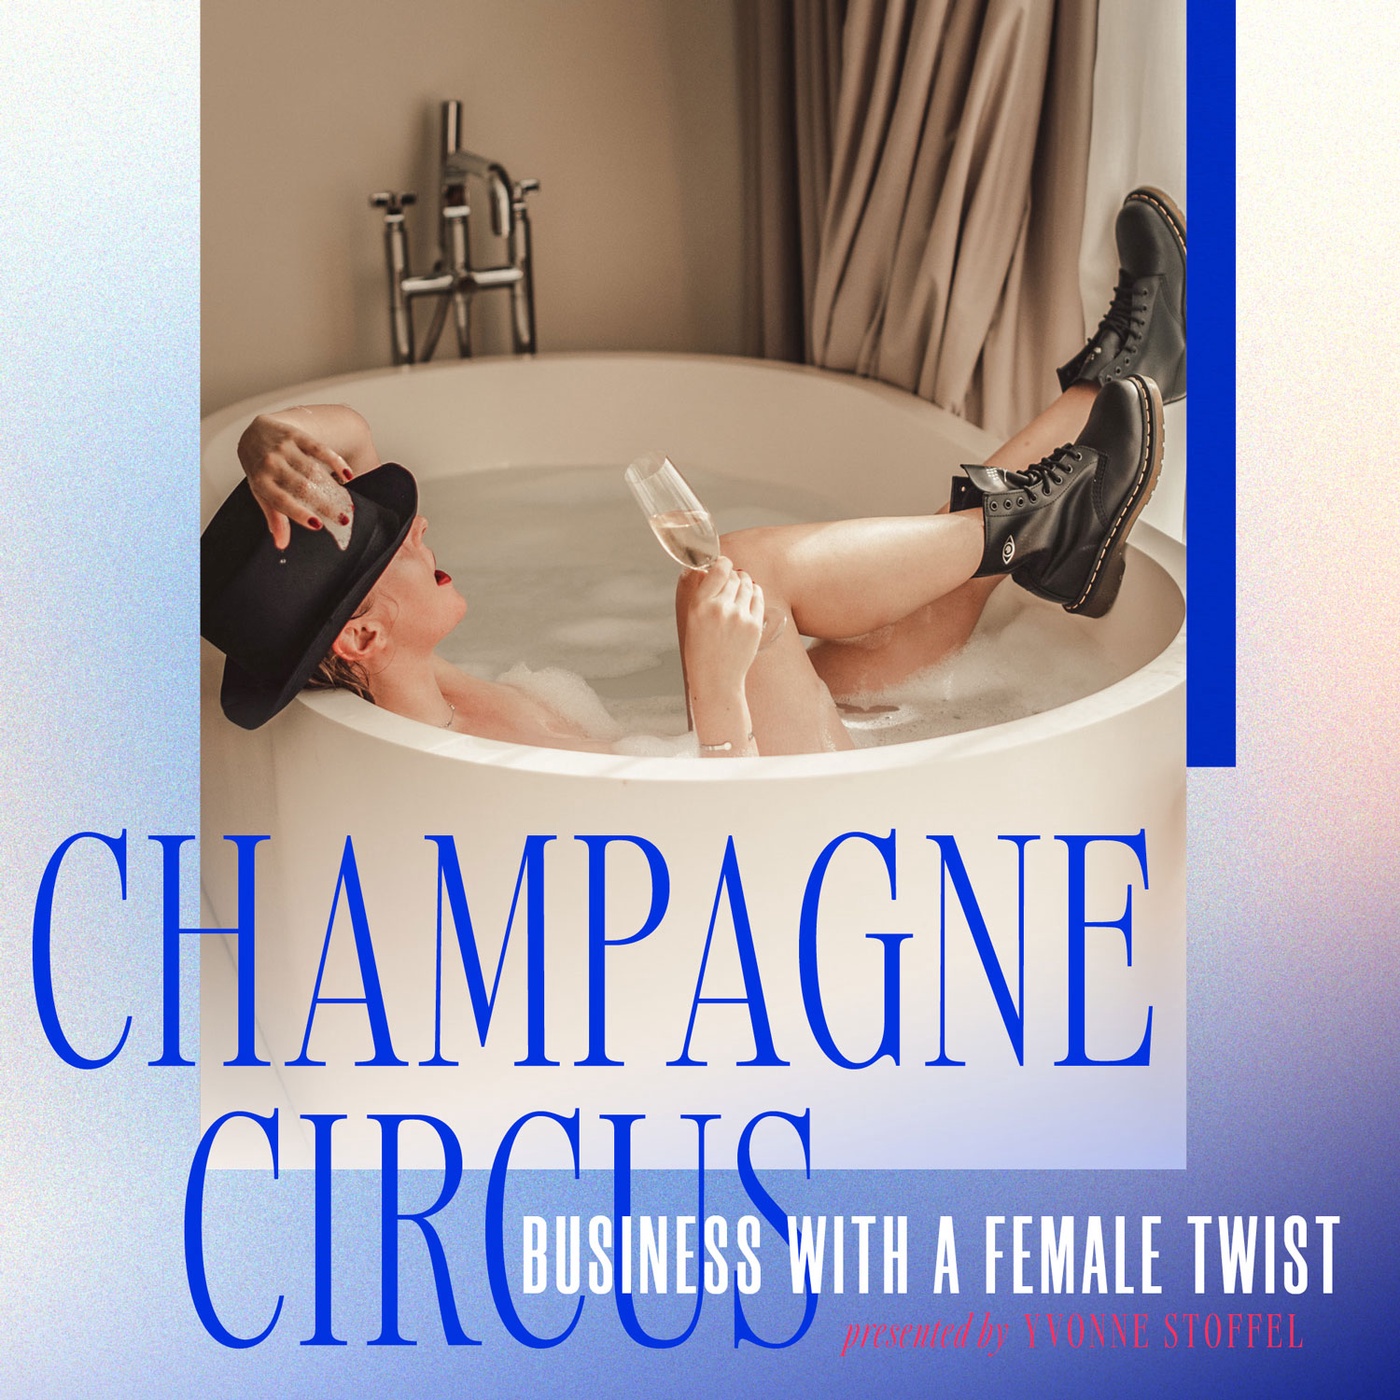 Champagne Circus - Business with a Female Twist